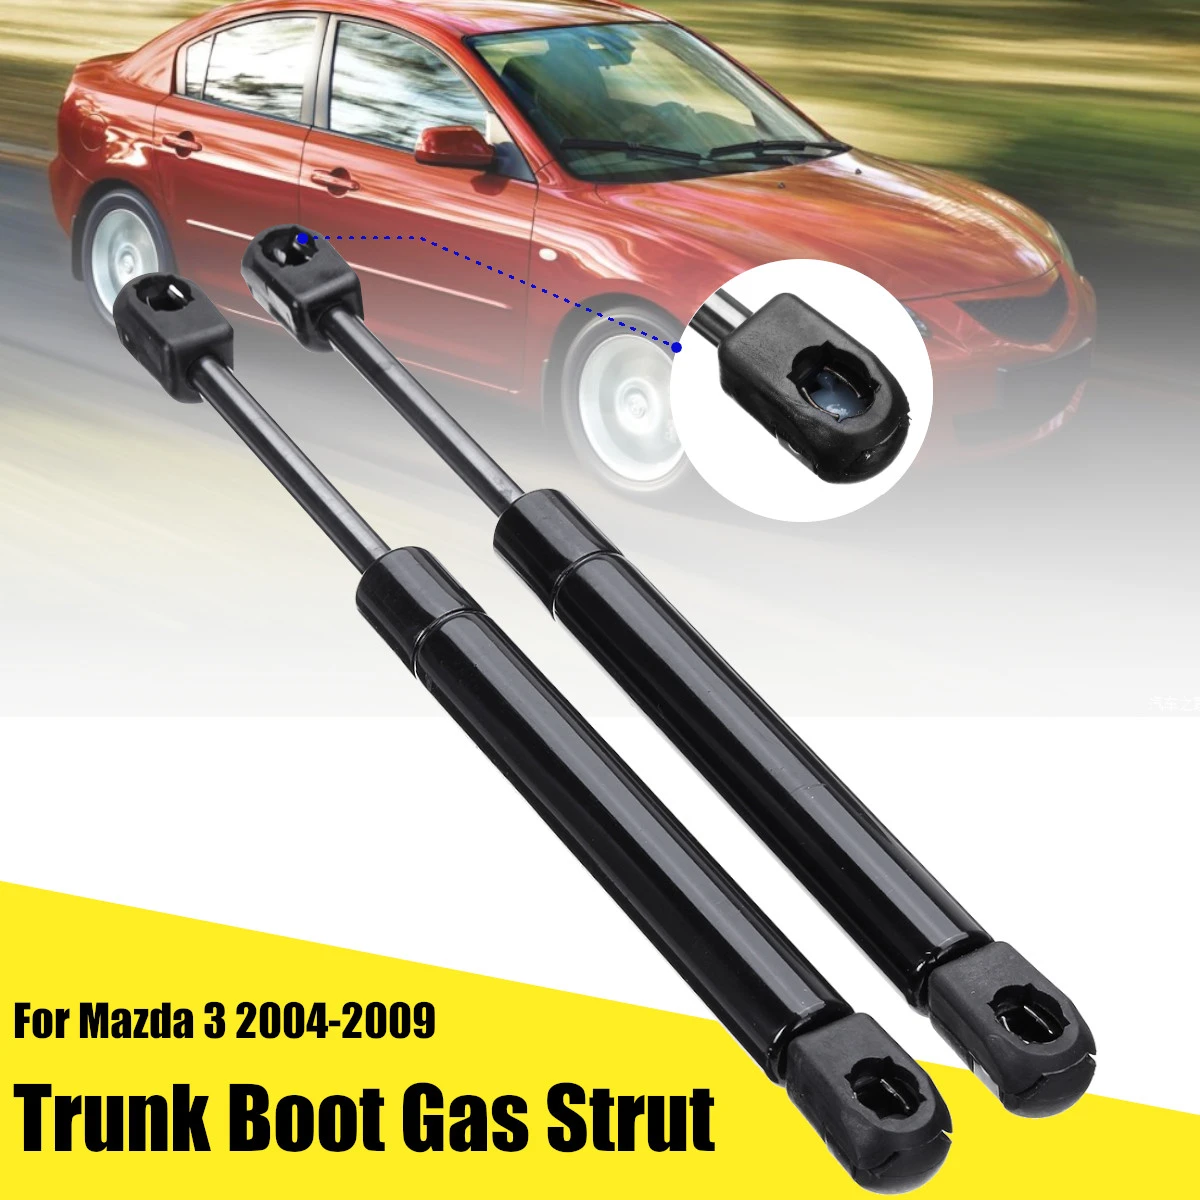 2pcs Car Tailgate Trunk Boot Gas Spring Strut Support Lift For Mazda 3 2004-2009 BN8W56930 BN8V56930 BN8W56930A